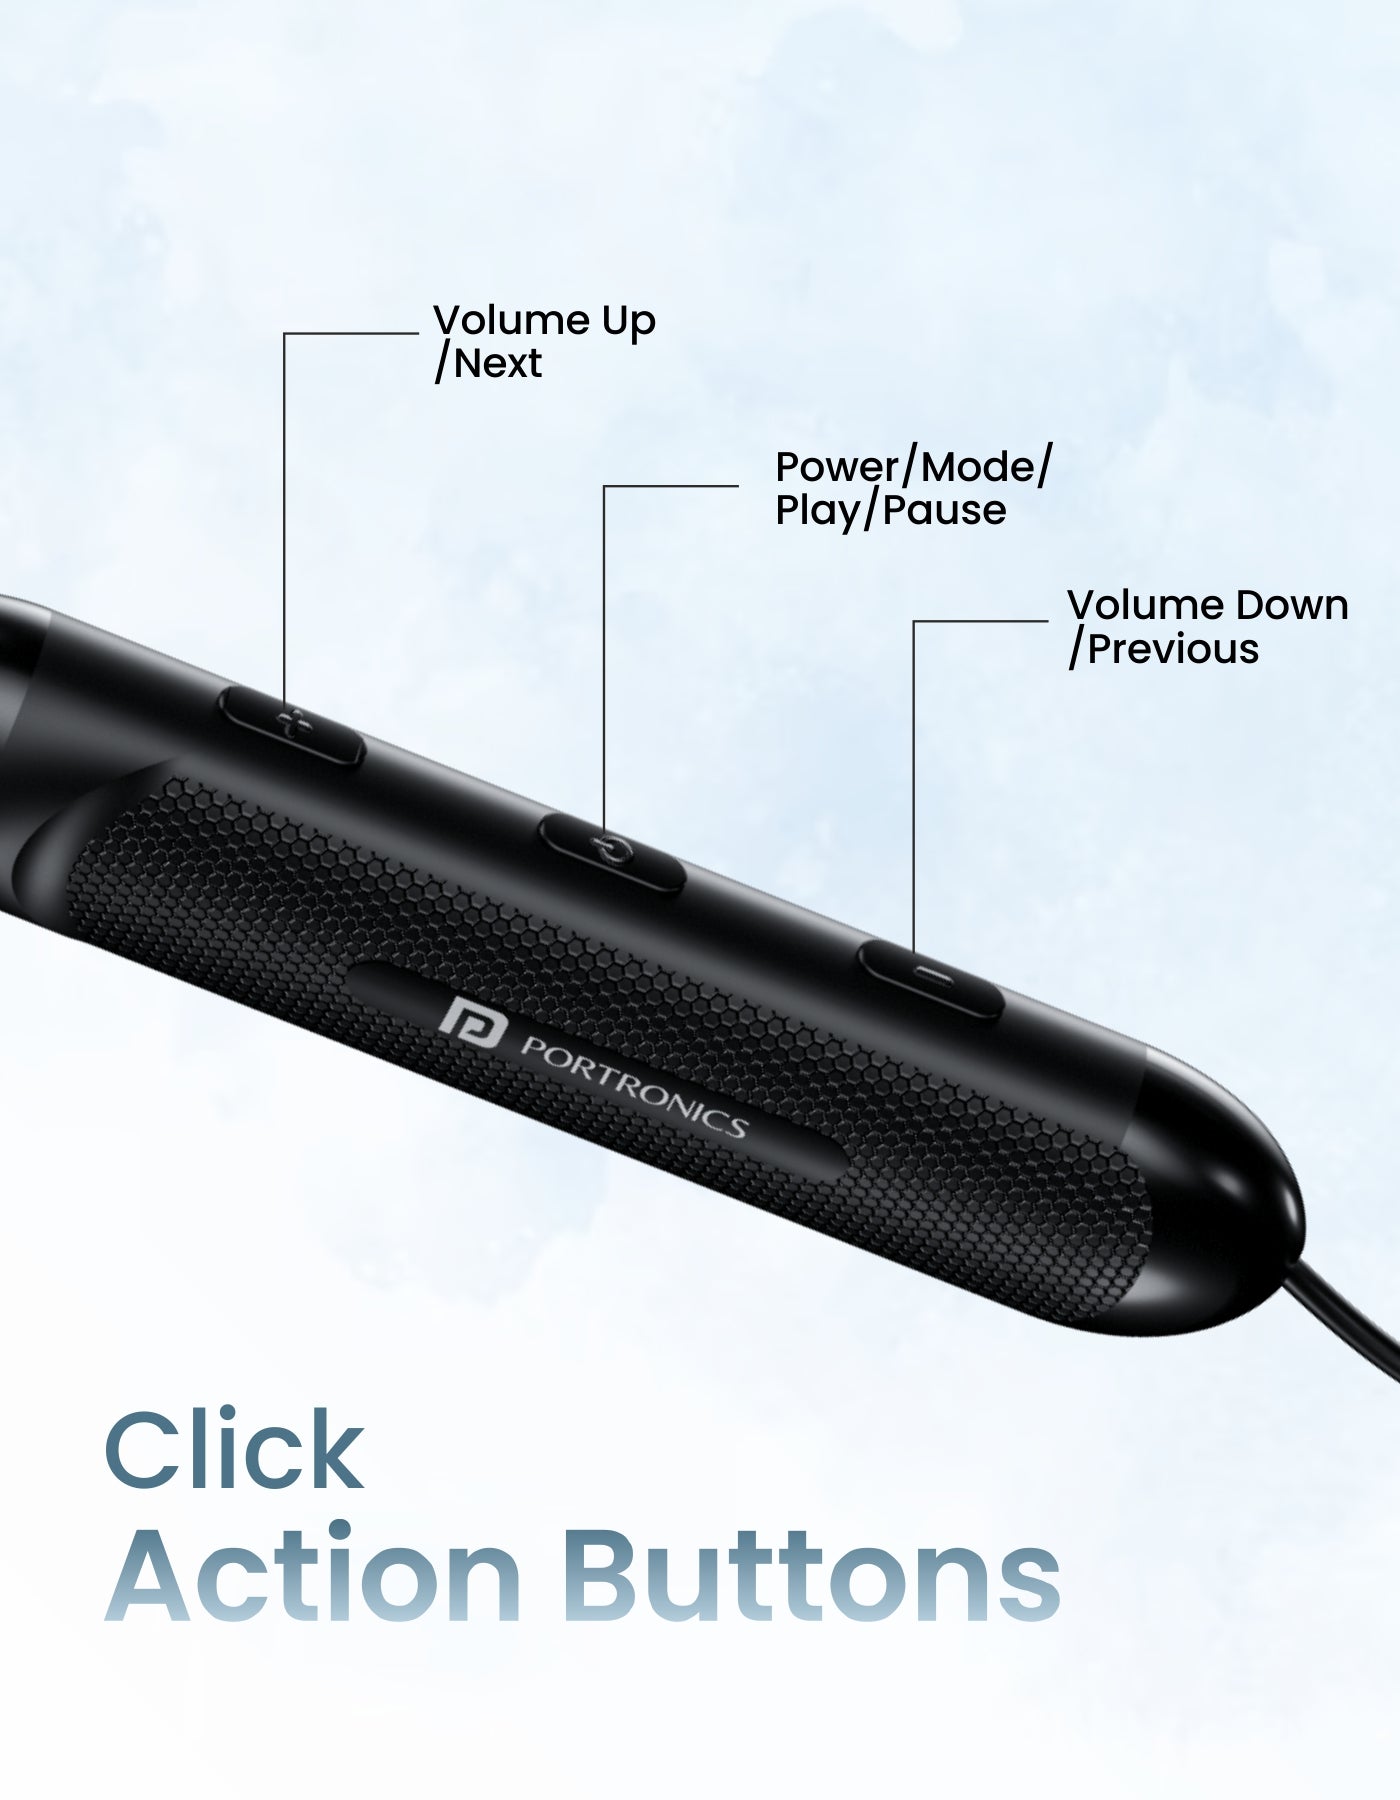 Portronics Harmonics Z7 bluetooth neckband earphones  be in control in click button for call and music playback